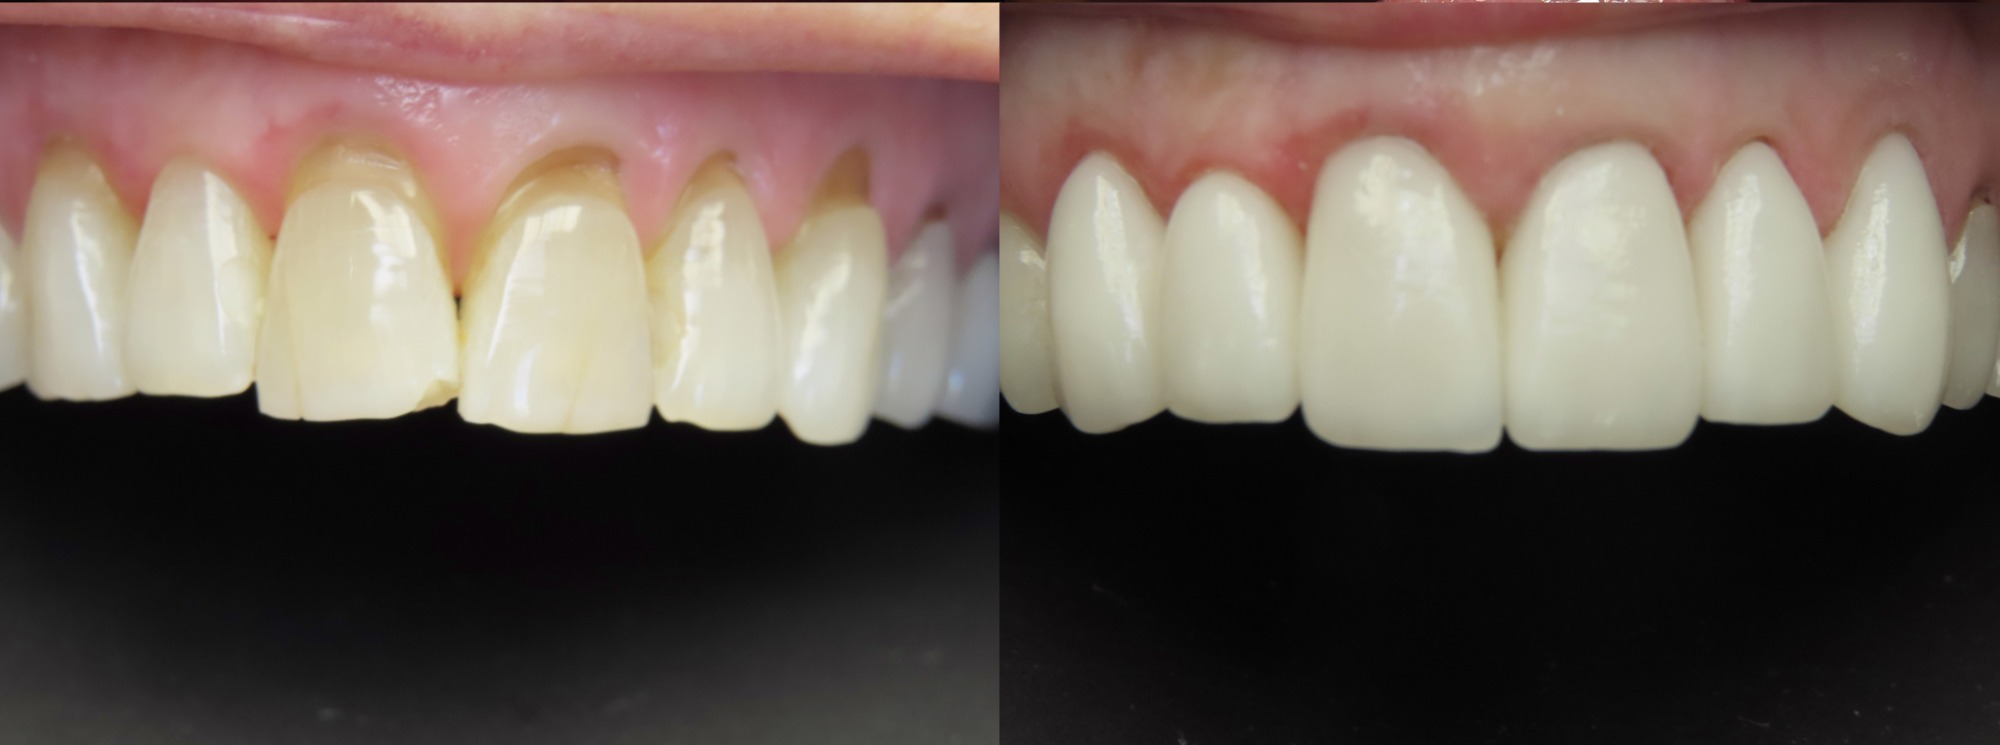 accent smile center before and afters